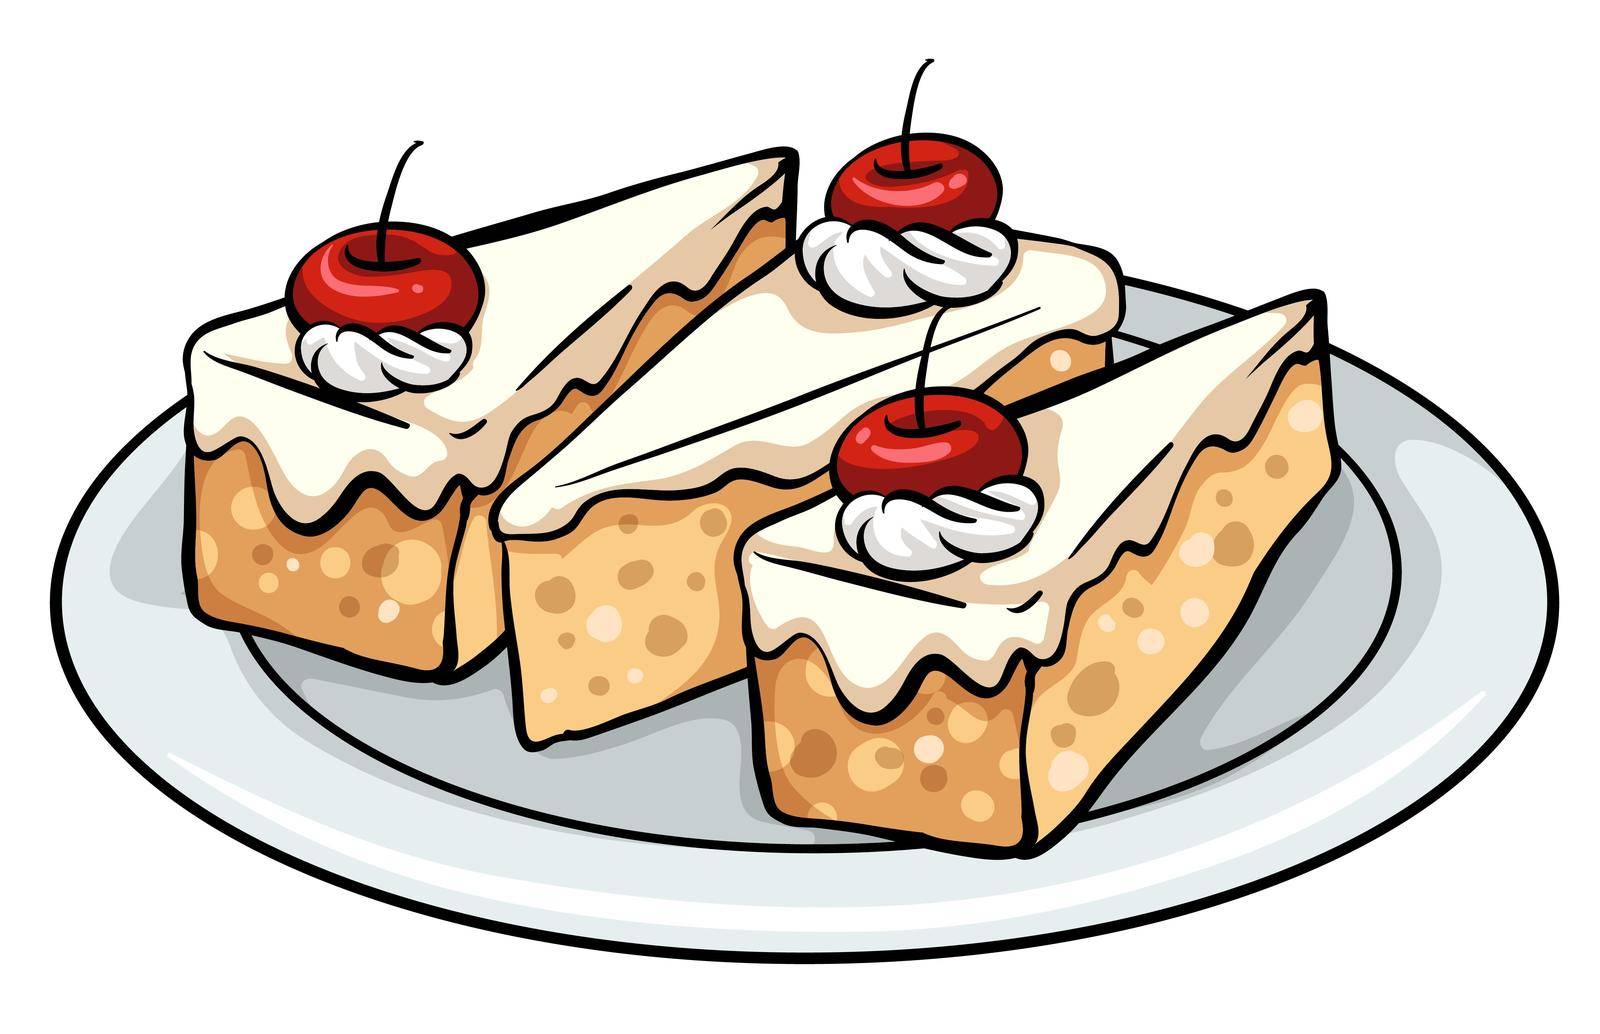 A plate with three slices of cakes on a white background